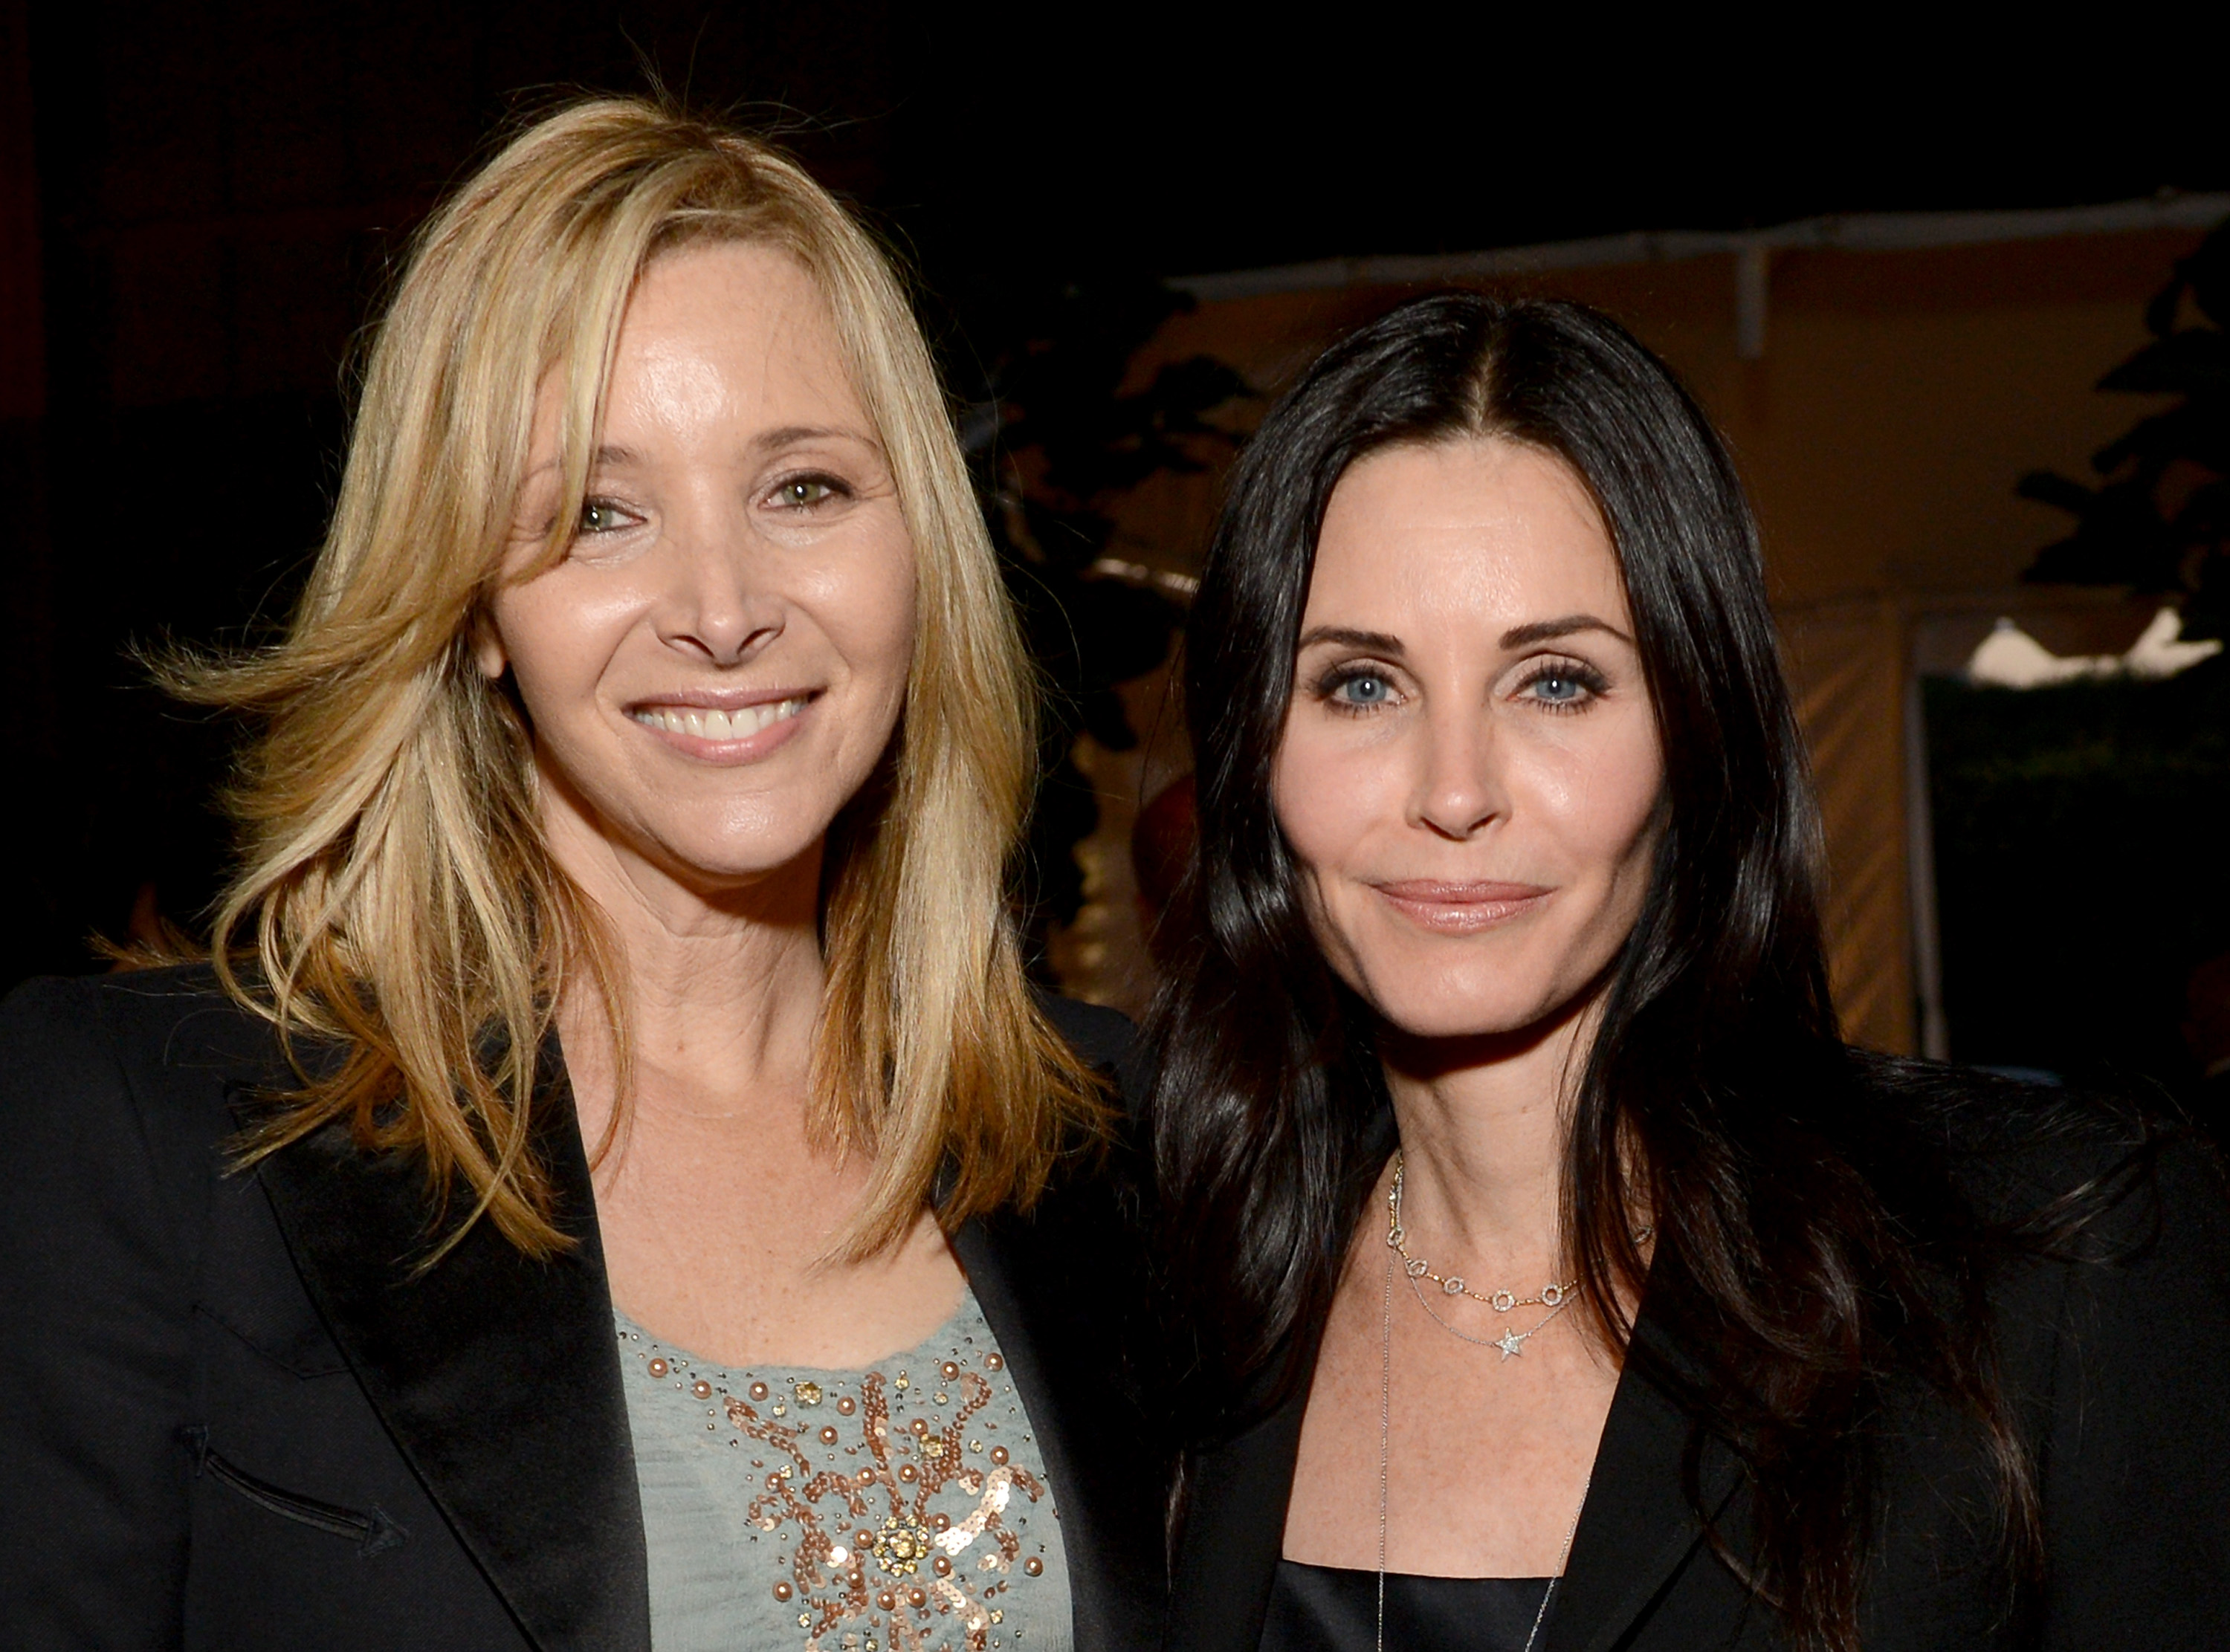 SANTA MONICA, CA - APRIL 25:  Actresses Lisa Kudrow (L) and Courteney Cox attend P.S. ARTS Presents: LA Modernism Show Opening Night at The Barker Hanger on April 25, 2013 in Santa Monica, California.  (Photo by Michael Kovac/Getty Images for P.S. Arts)